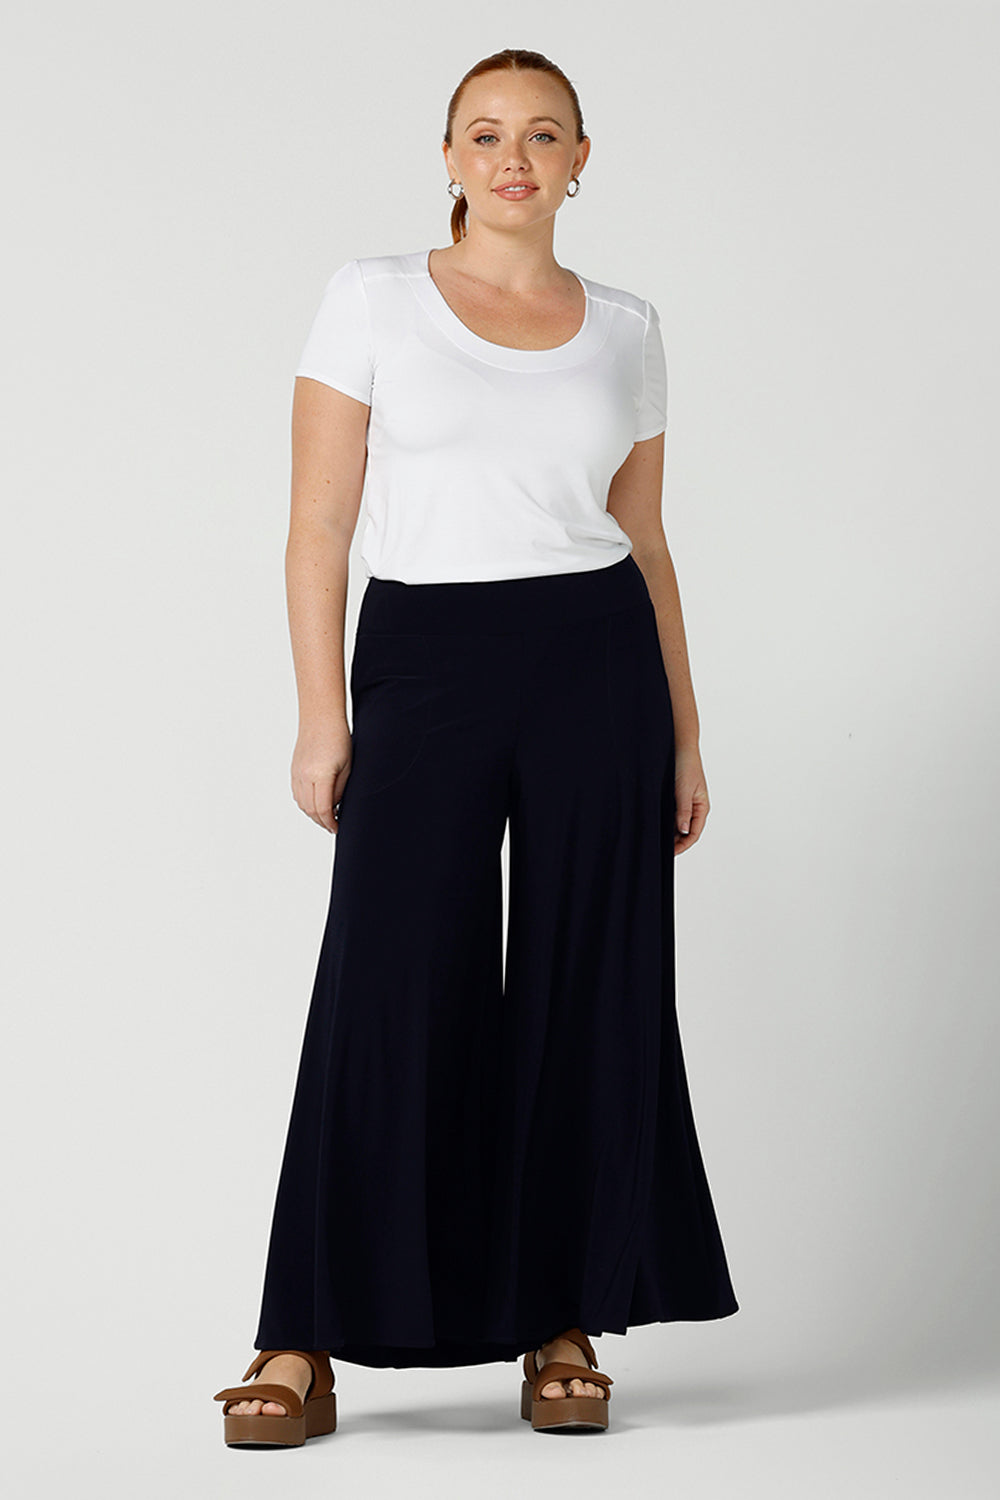 A good example of ladies clothing in Australia, this round neck, short sleeve top in white bamboo jersey is shown in a size 12 on a curvy woman. Worn with navy, wide leg palazzo pants, if you're seeking a ladies casual top then this white tee top by Australian women's online clothing brand, Leina & Fleur,  is the perfect edition to your capsule wardrobe!